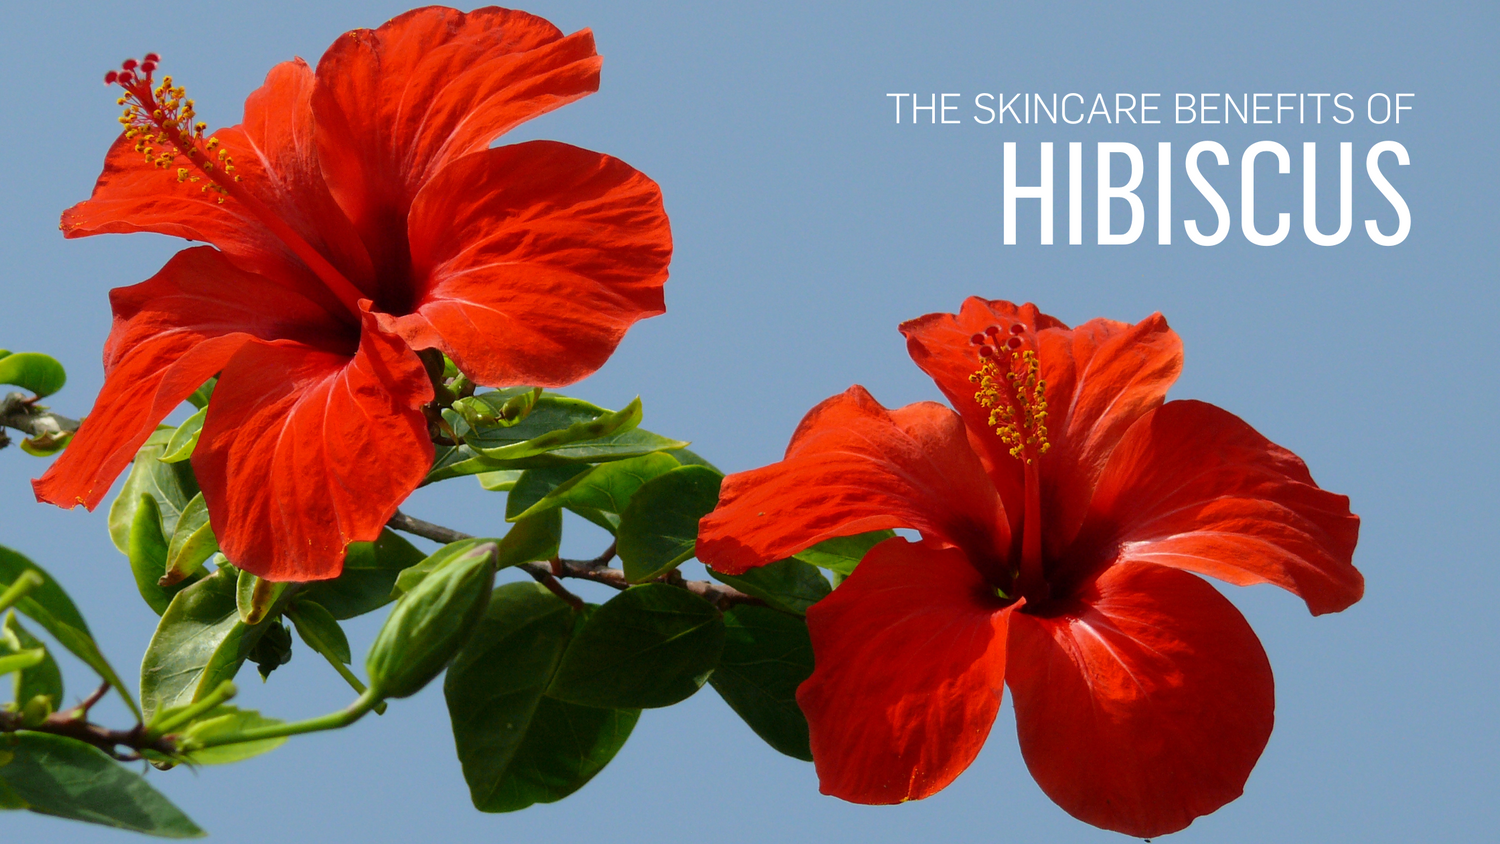 The Skincare Benefits of Hibiscus